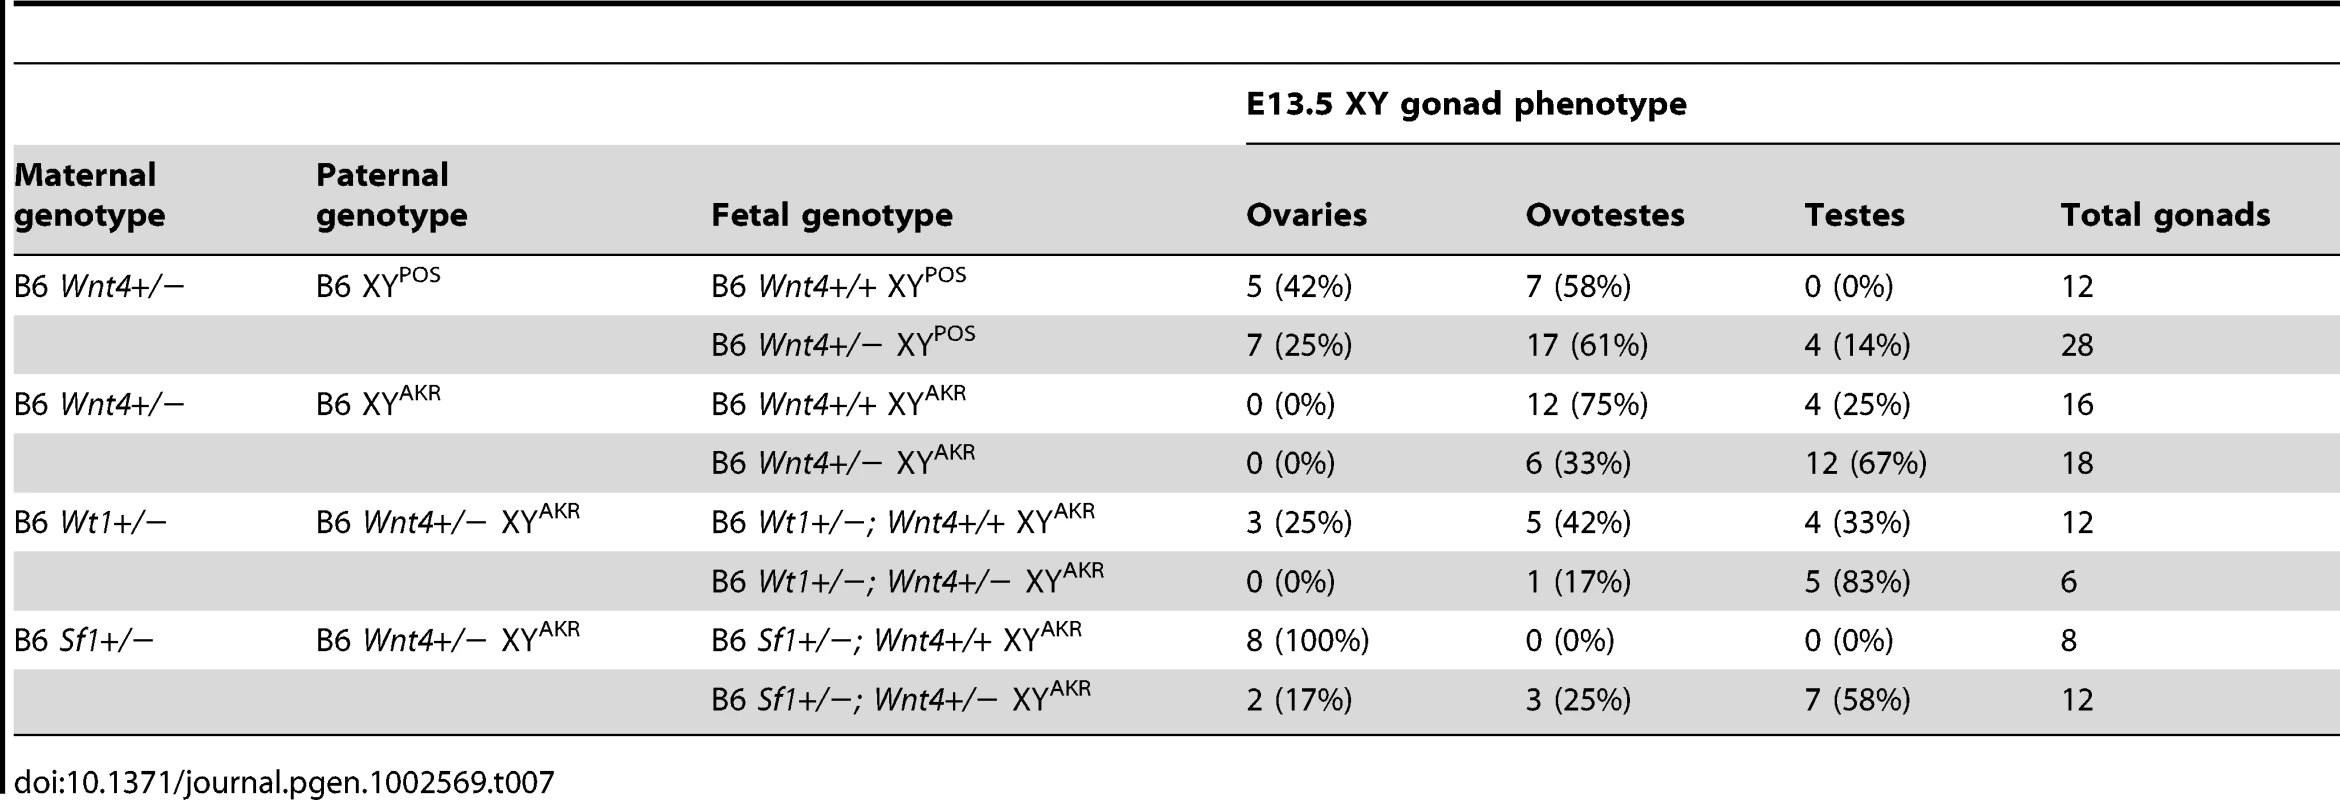 Reducing the &lt;i&gt;Wnt4&lt;/i&gt; dosage partially rescues the sex reversal phenotypes of E13.5 B6 XY&lt;sup&gt;POS&lt;/sup&gt;, B6 XY&lt;sup&gt;AKR&lt;/sup&gt;, B6 &lt;i&gt;Wt1&lt;/i&gt;+/− XY&lt;sup&gt;AKR&lt;/sup&gt;, and B6 &lt;i&gt;Sf1&lt;/i&gt;+/− XY&lt;sup&gt;AKR&lt;/sup&gt; gonads.